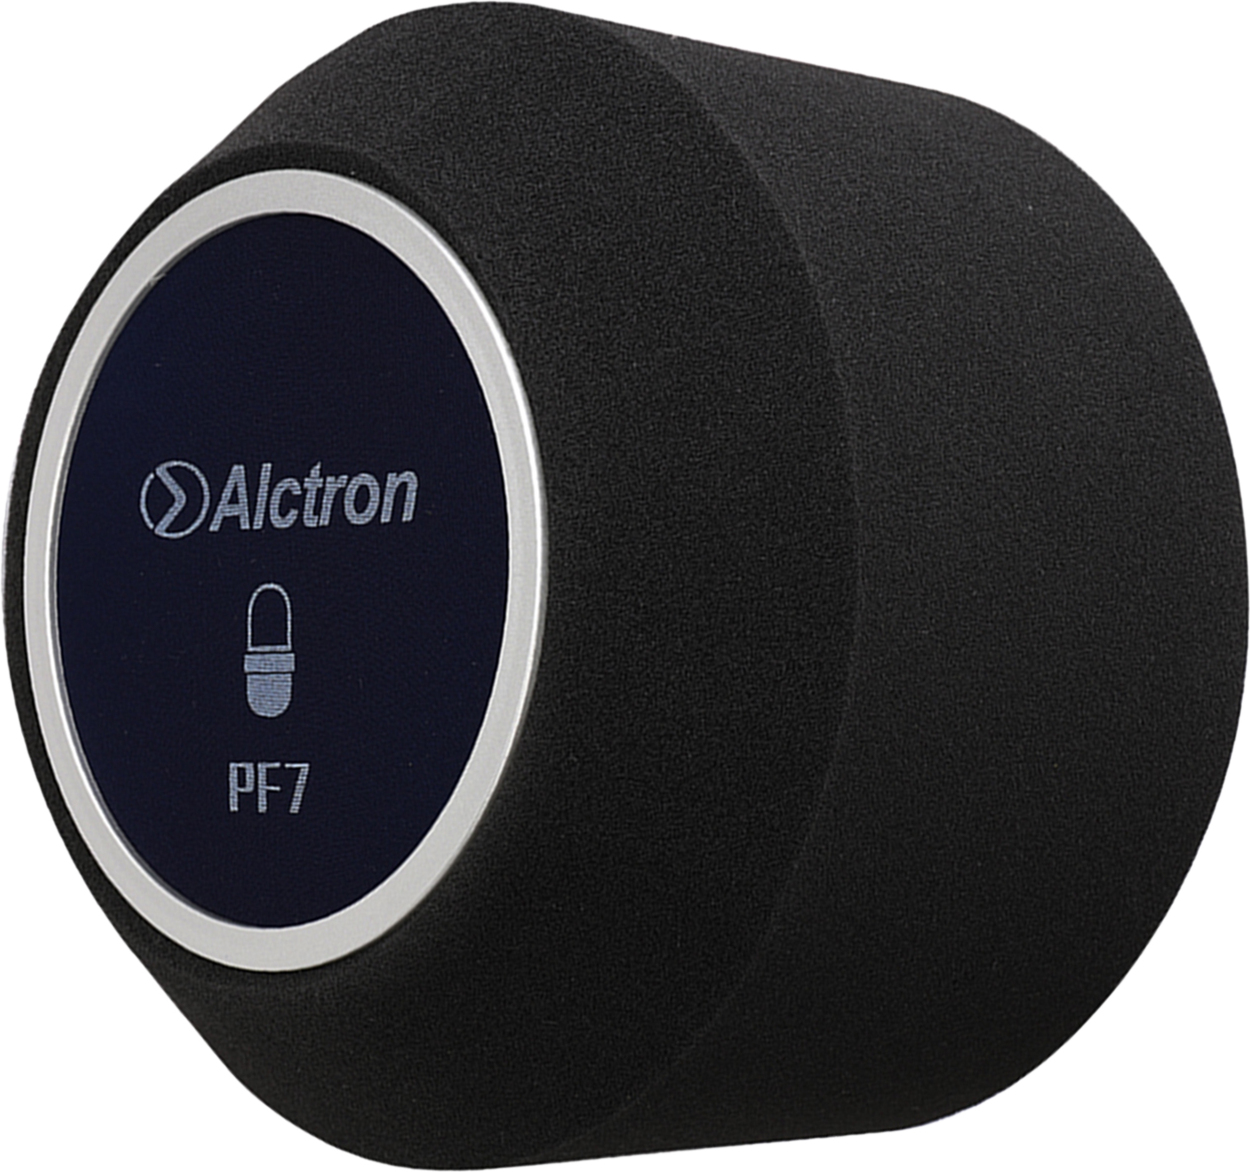 Alctron Pf 7 - Filtro antipopping - Main picture